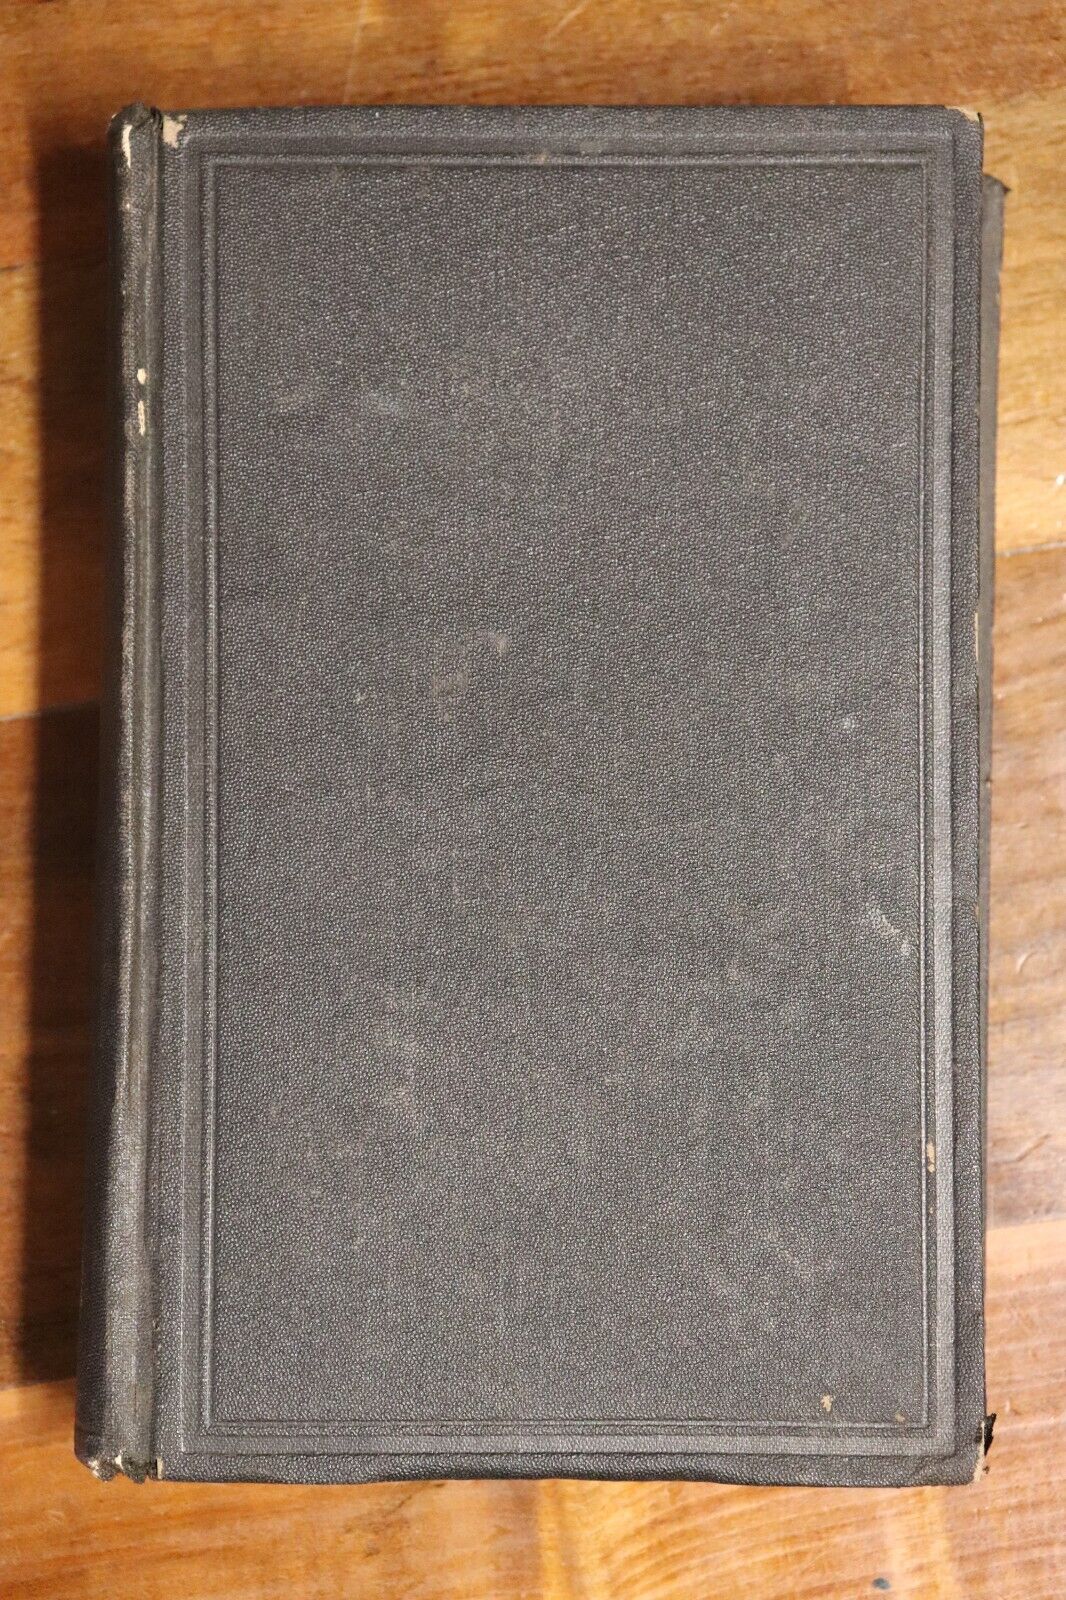 The Works Of William E Channing - 1869 - Antique Theology Book Vol. 5